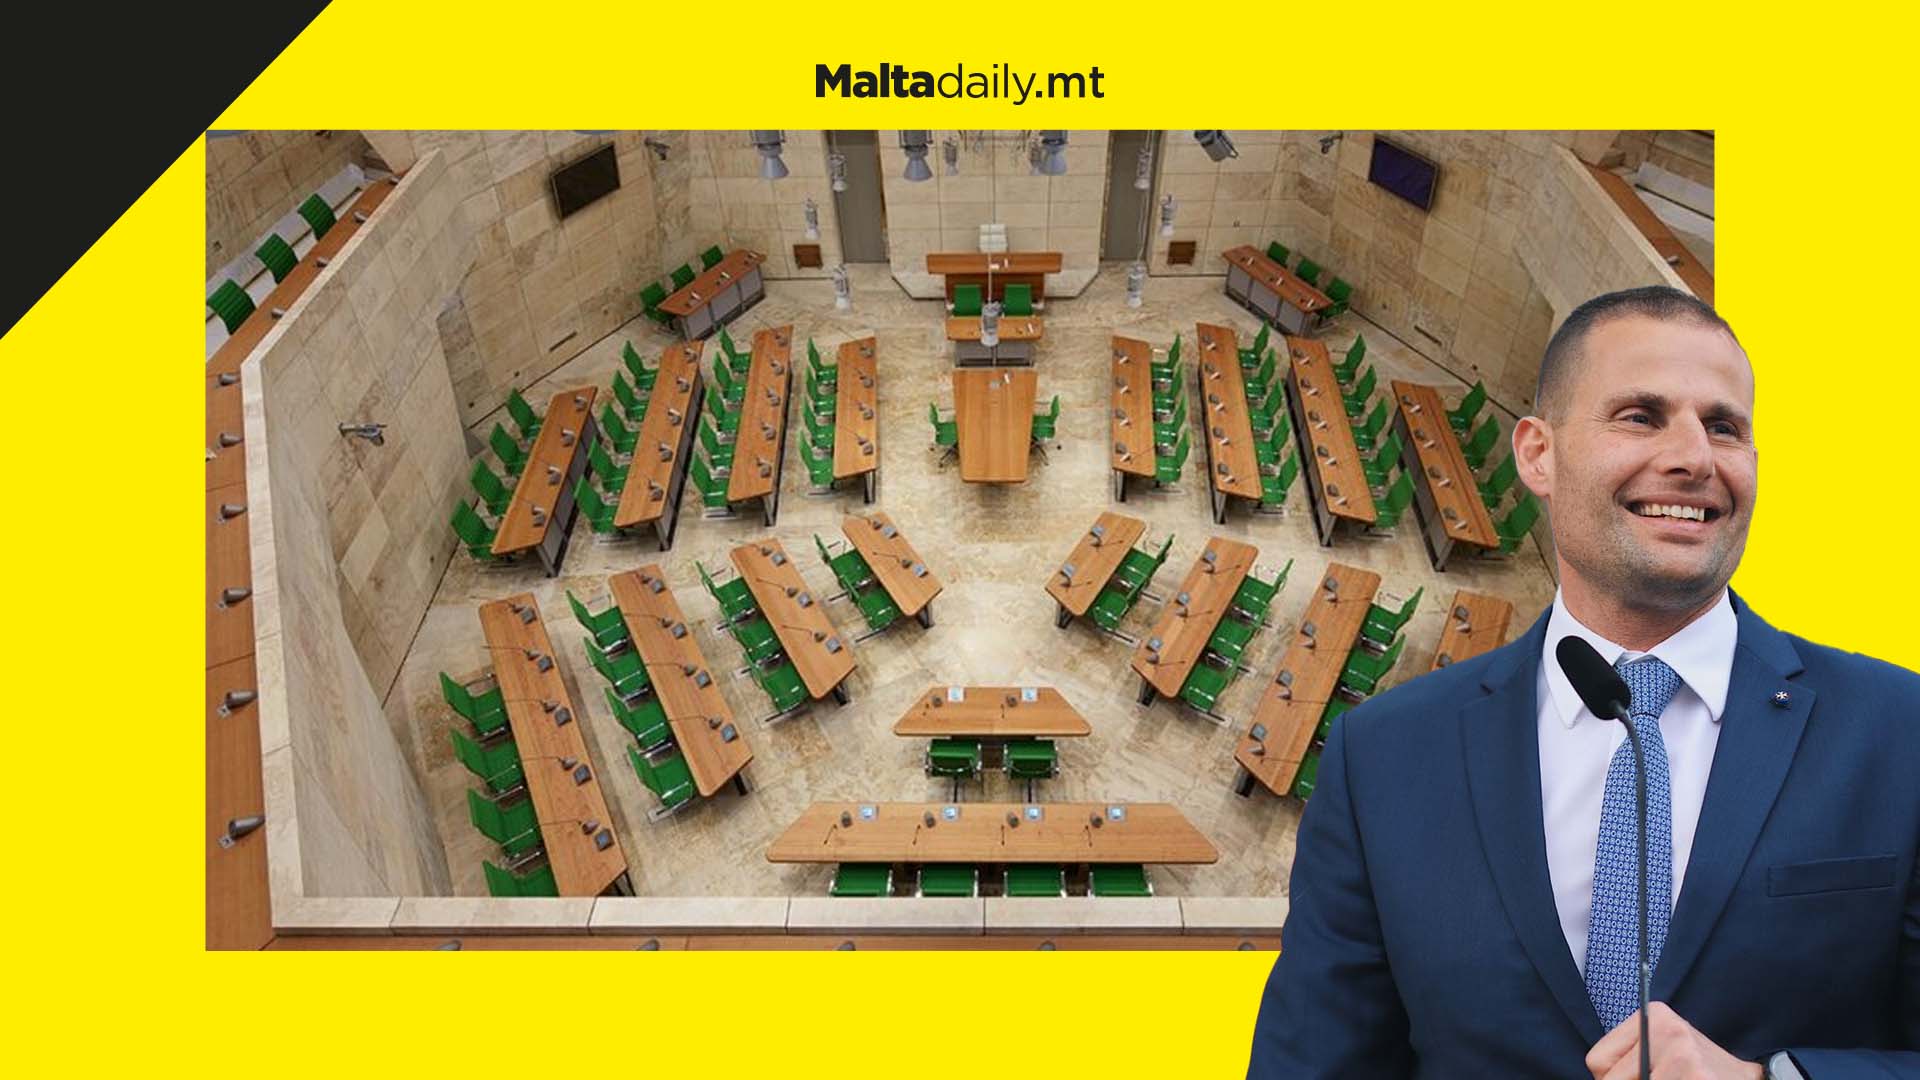 Parliament set to open on May 7th